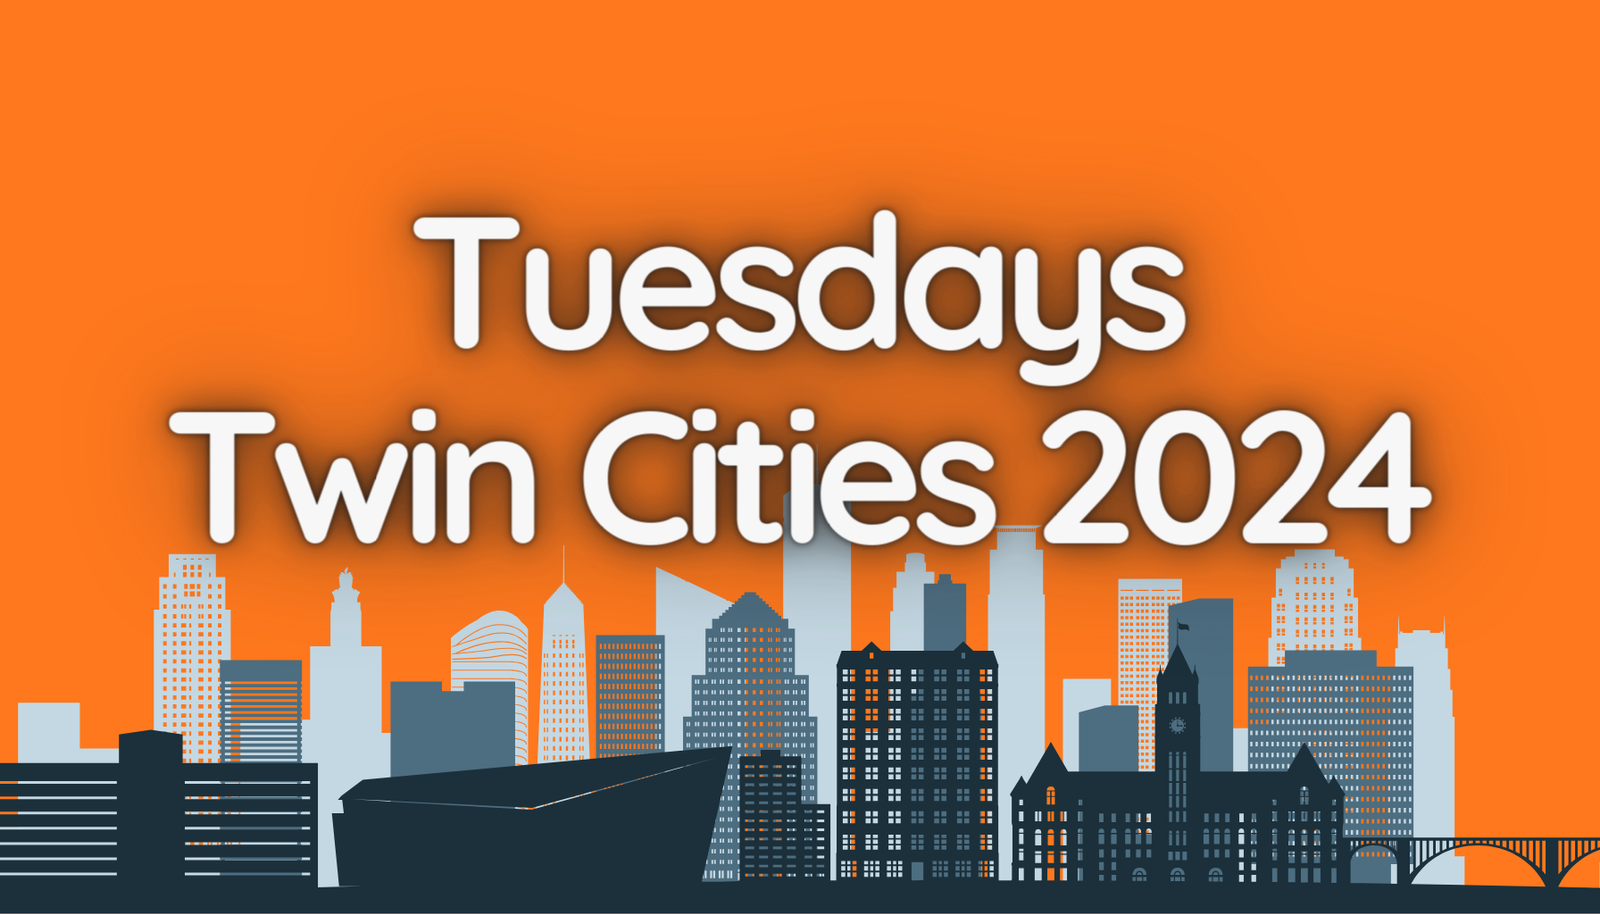 Best Things To Do in the Twin Cities on Tuesday 2024